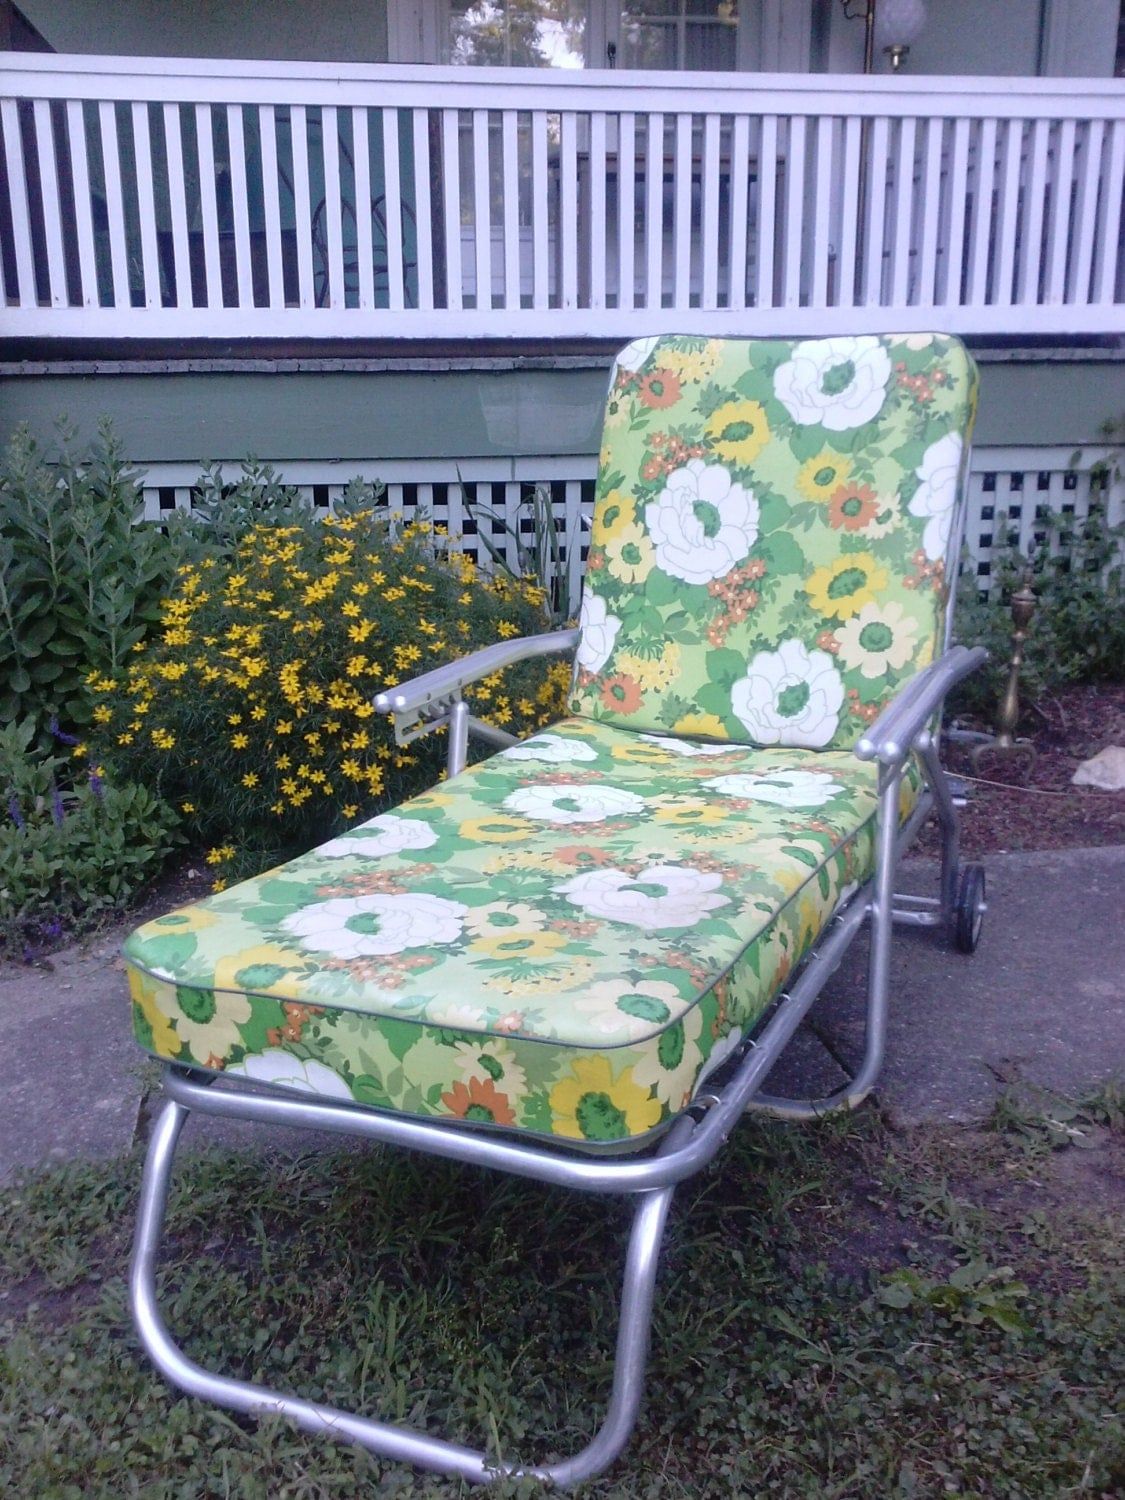 Hold/ Vintage Mid Century Aluminum Chaise Loungenortherngate Pertaining To Steel Arm Outdoor Aluminum Chaise Sets (View 14 of 15)